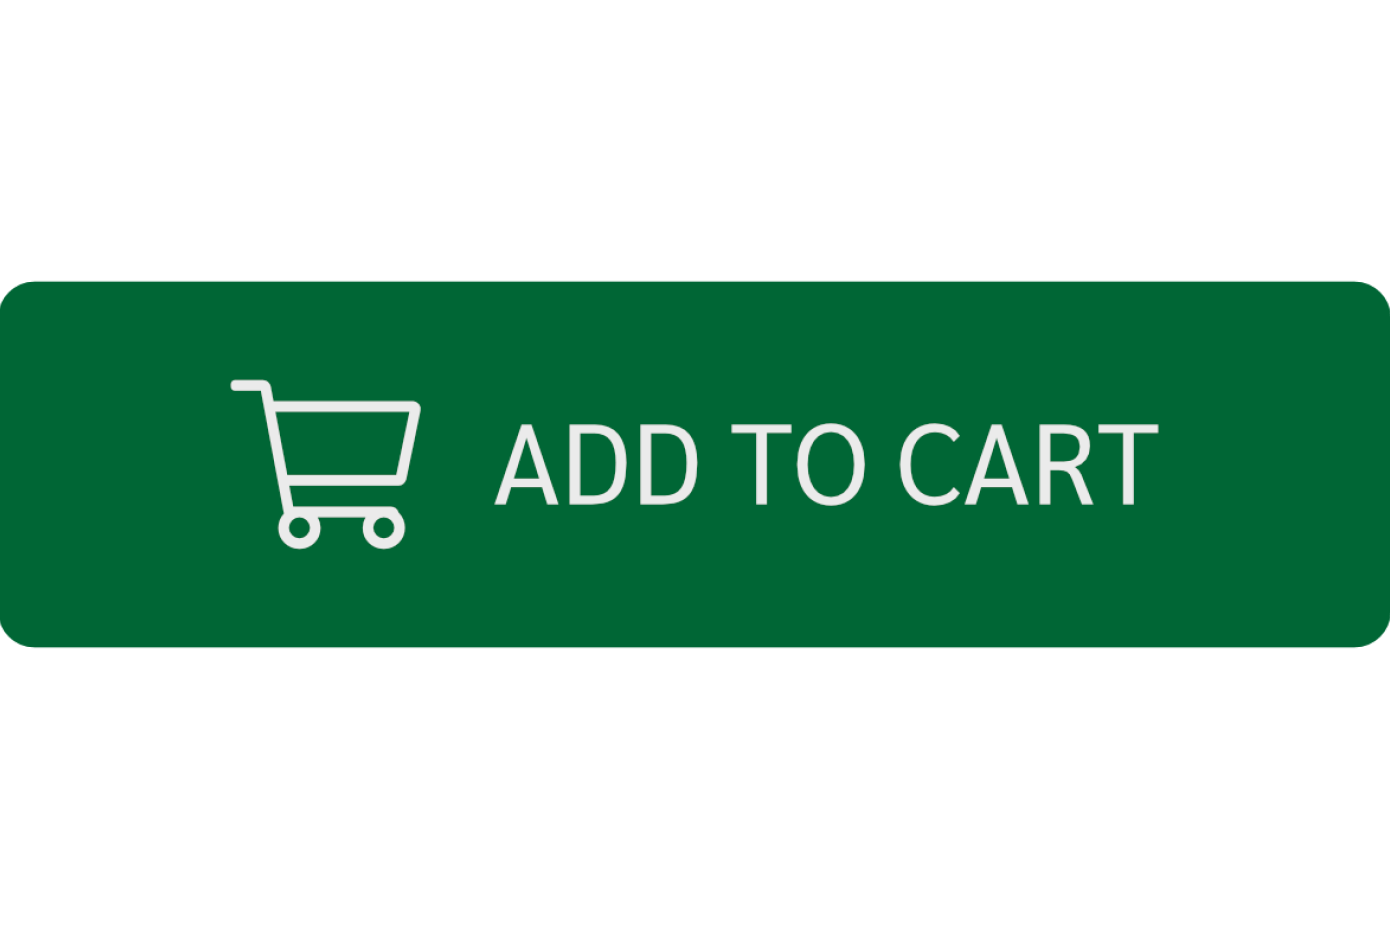 Add to cart button icon